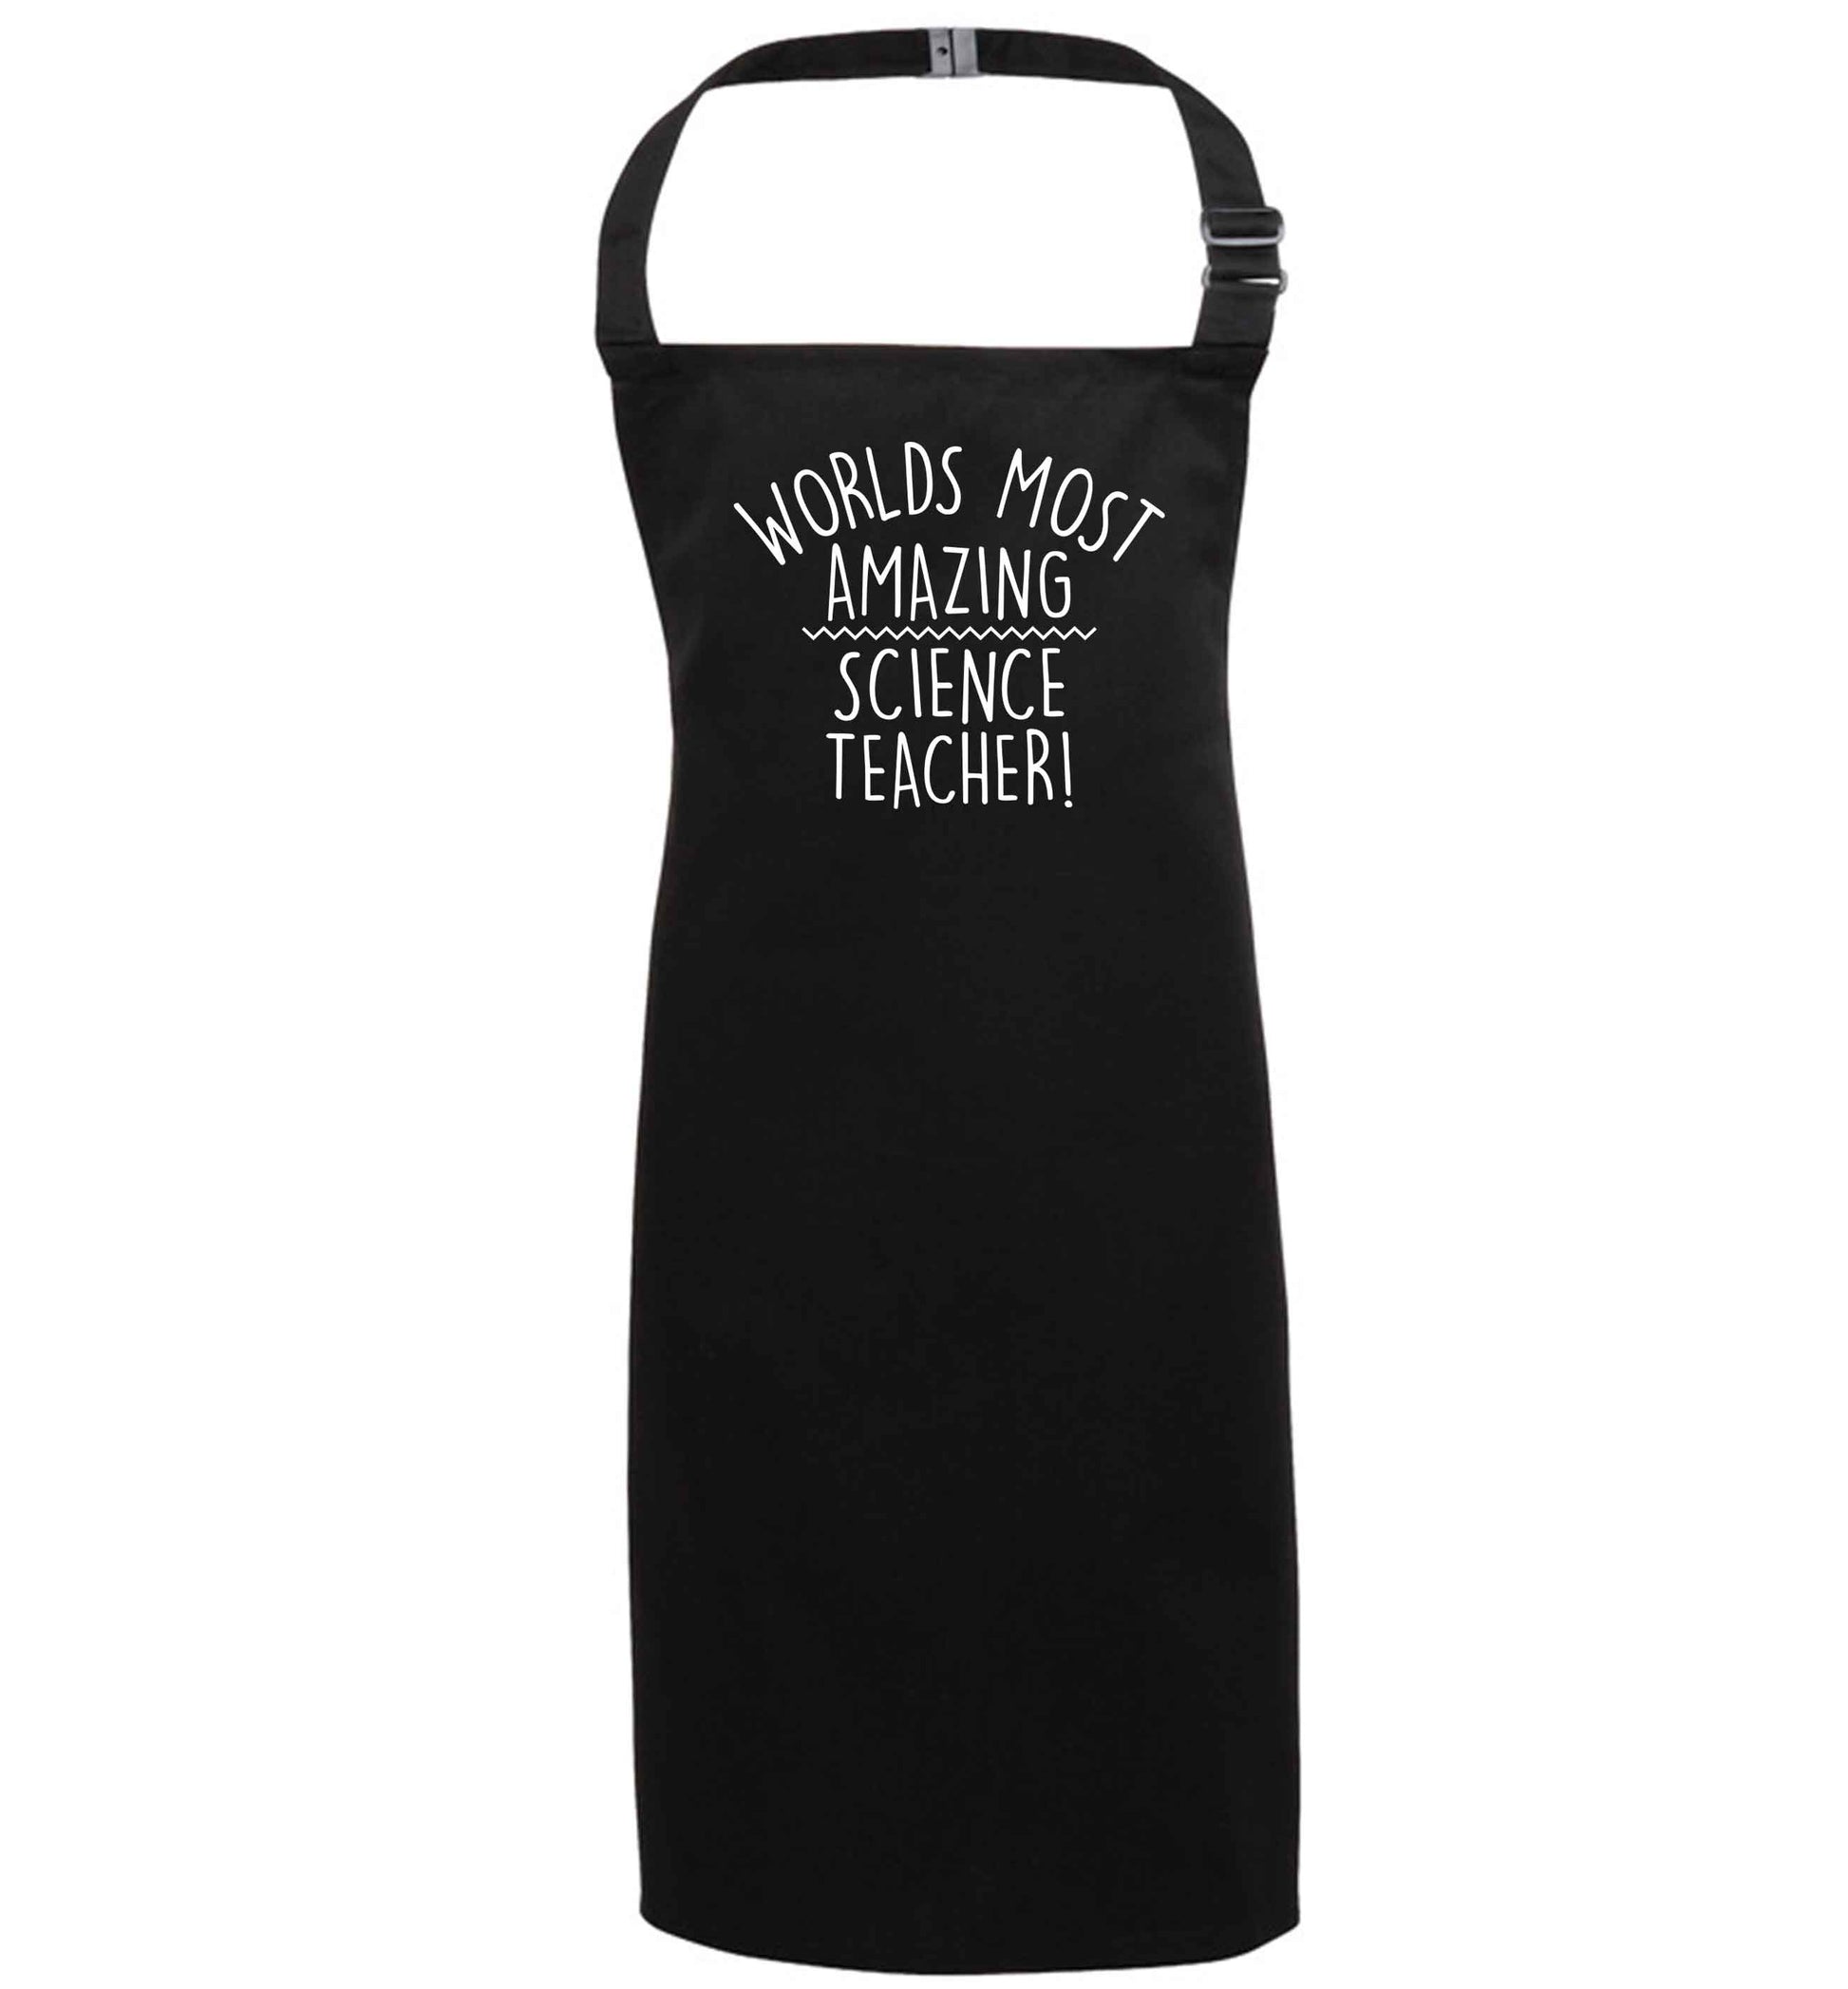 Worlds most amazing science teacher black apron 7-10 years